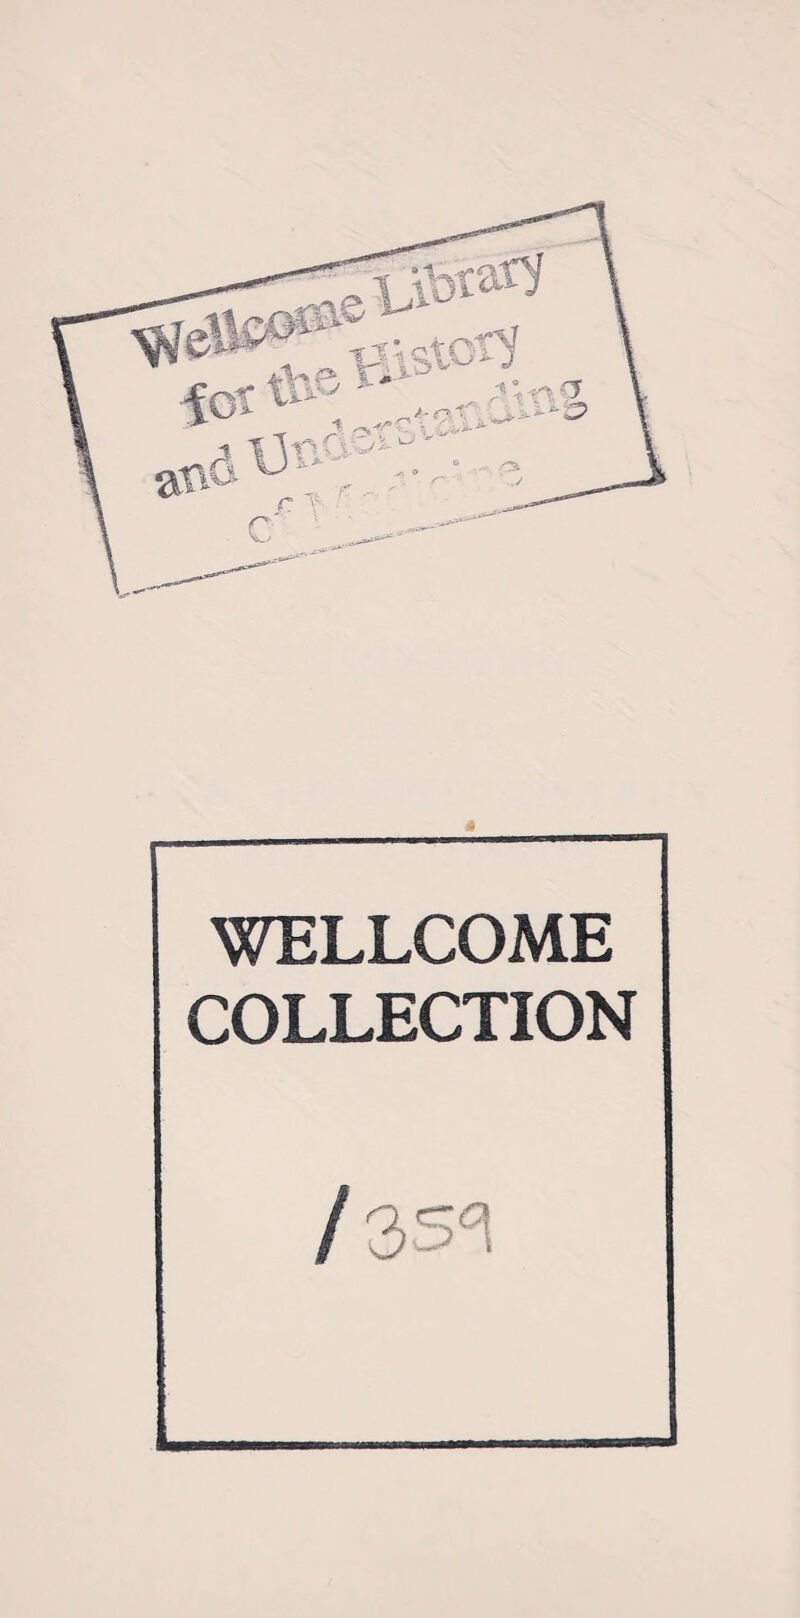 WELLCOME COLLECTION / 35^